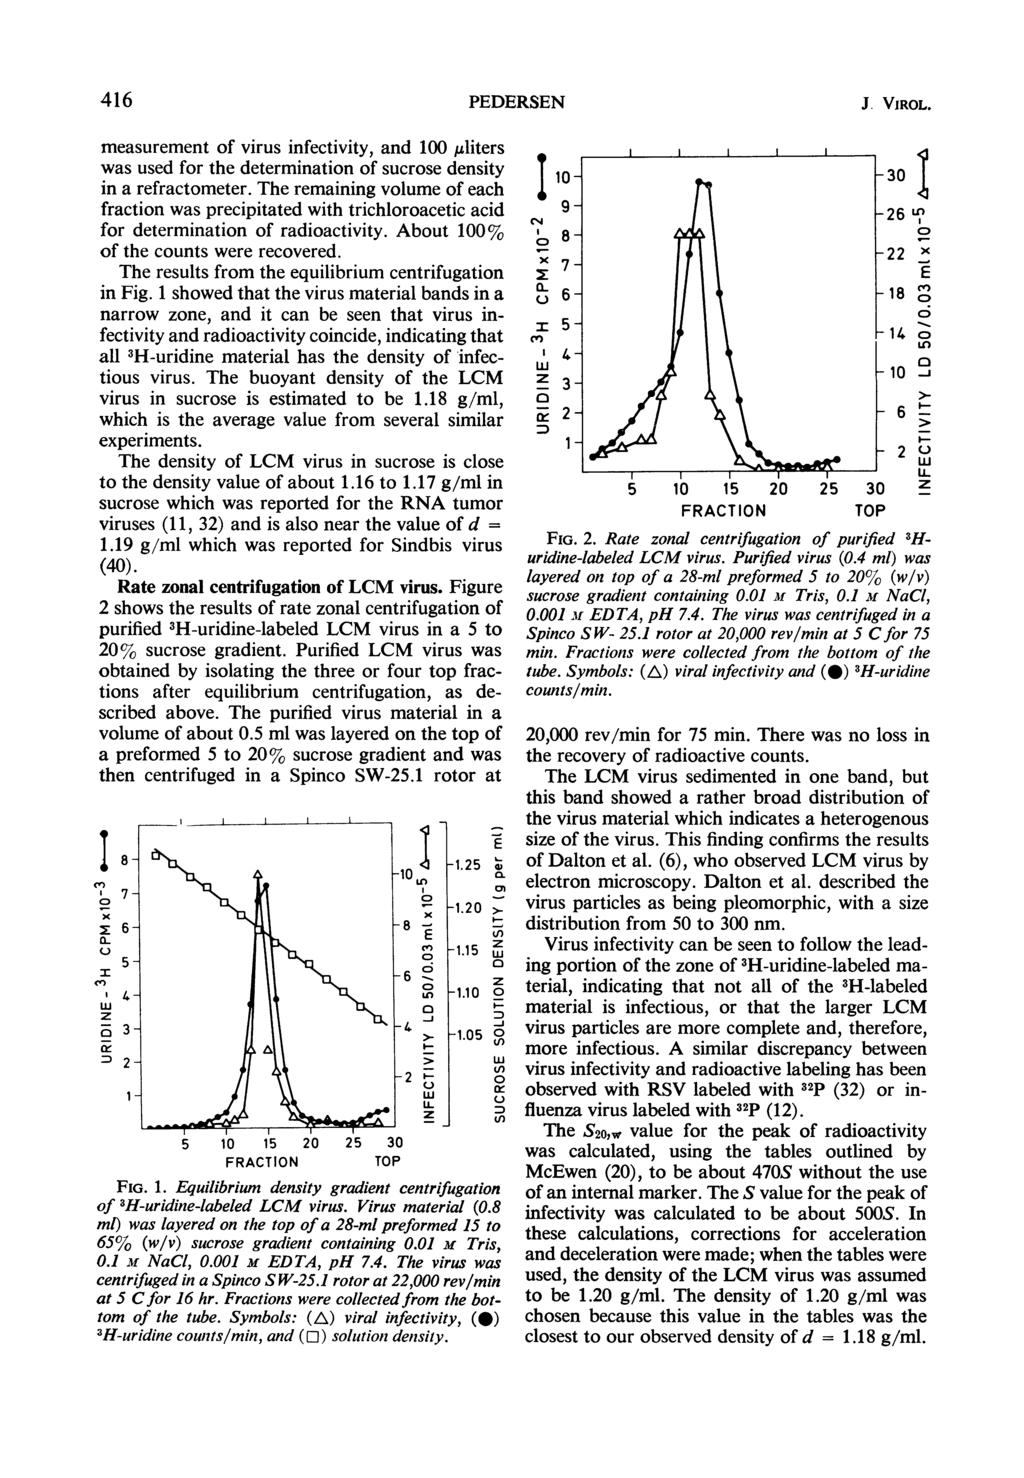 416 PEDERSEN J. VIROL. measurement of virus infectivity, and 1,uliters was used for the determination of sucrose density in a refractometer.